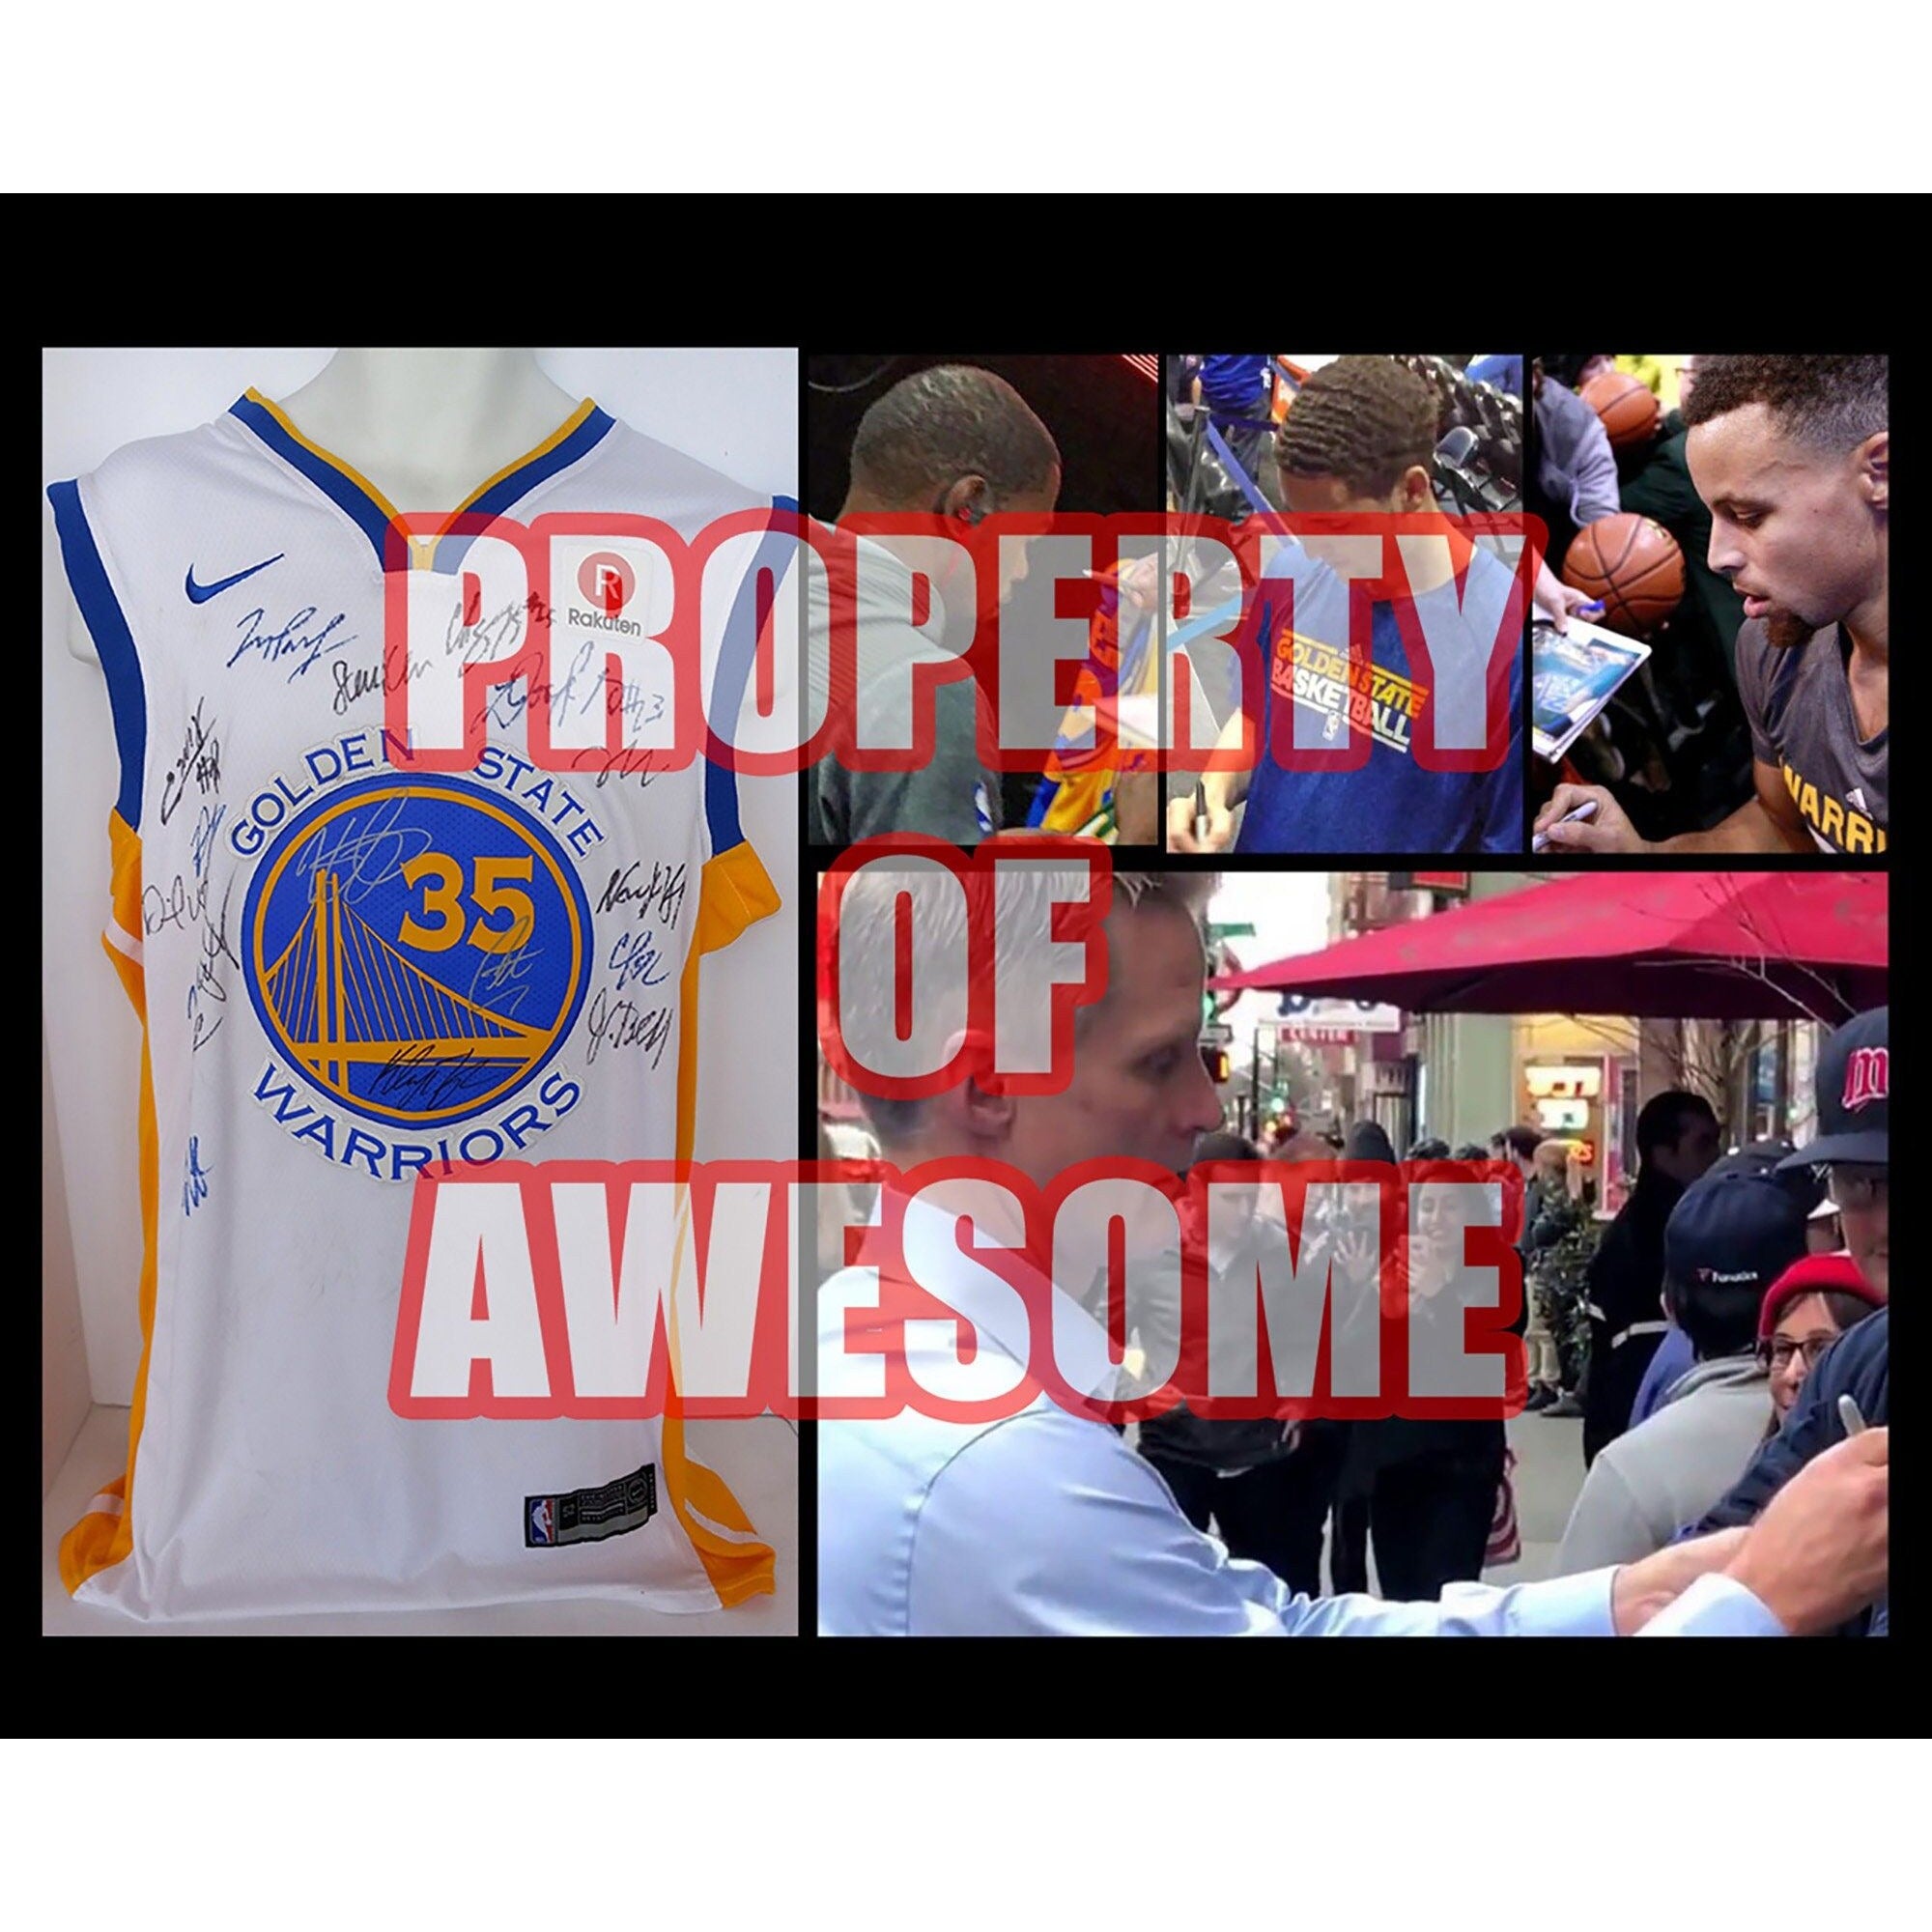 Golden State Warriors 2017-18 NBA champs Stephen Curry, Klay Thompson team signed jersey with proof